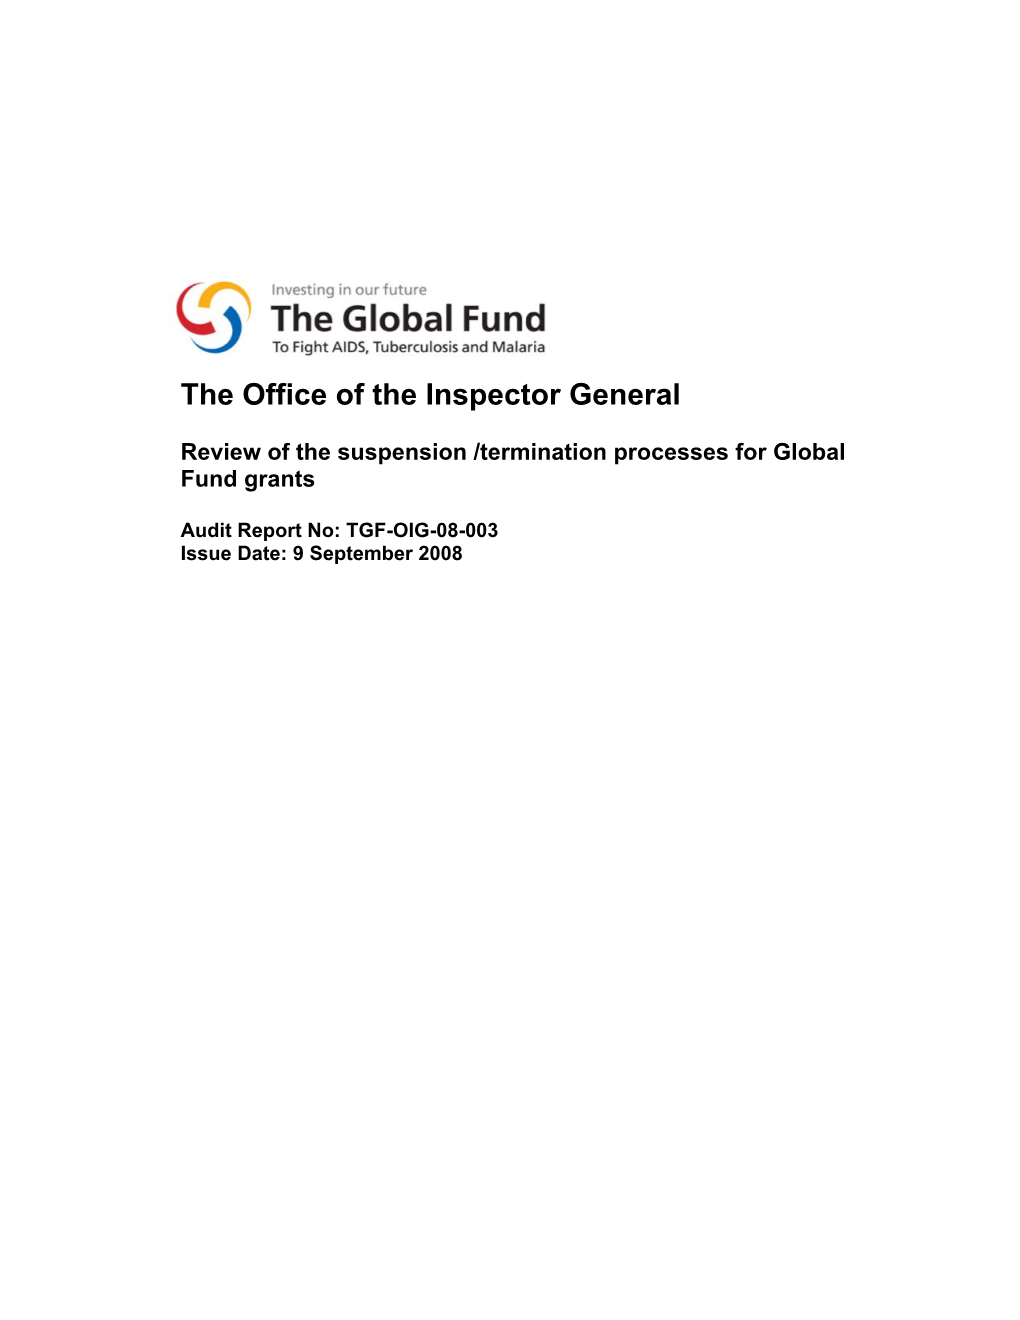 English Review of the Suspension/Termination Processes for Global Fund Grants